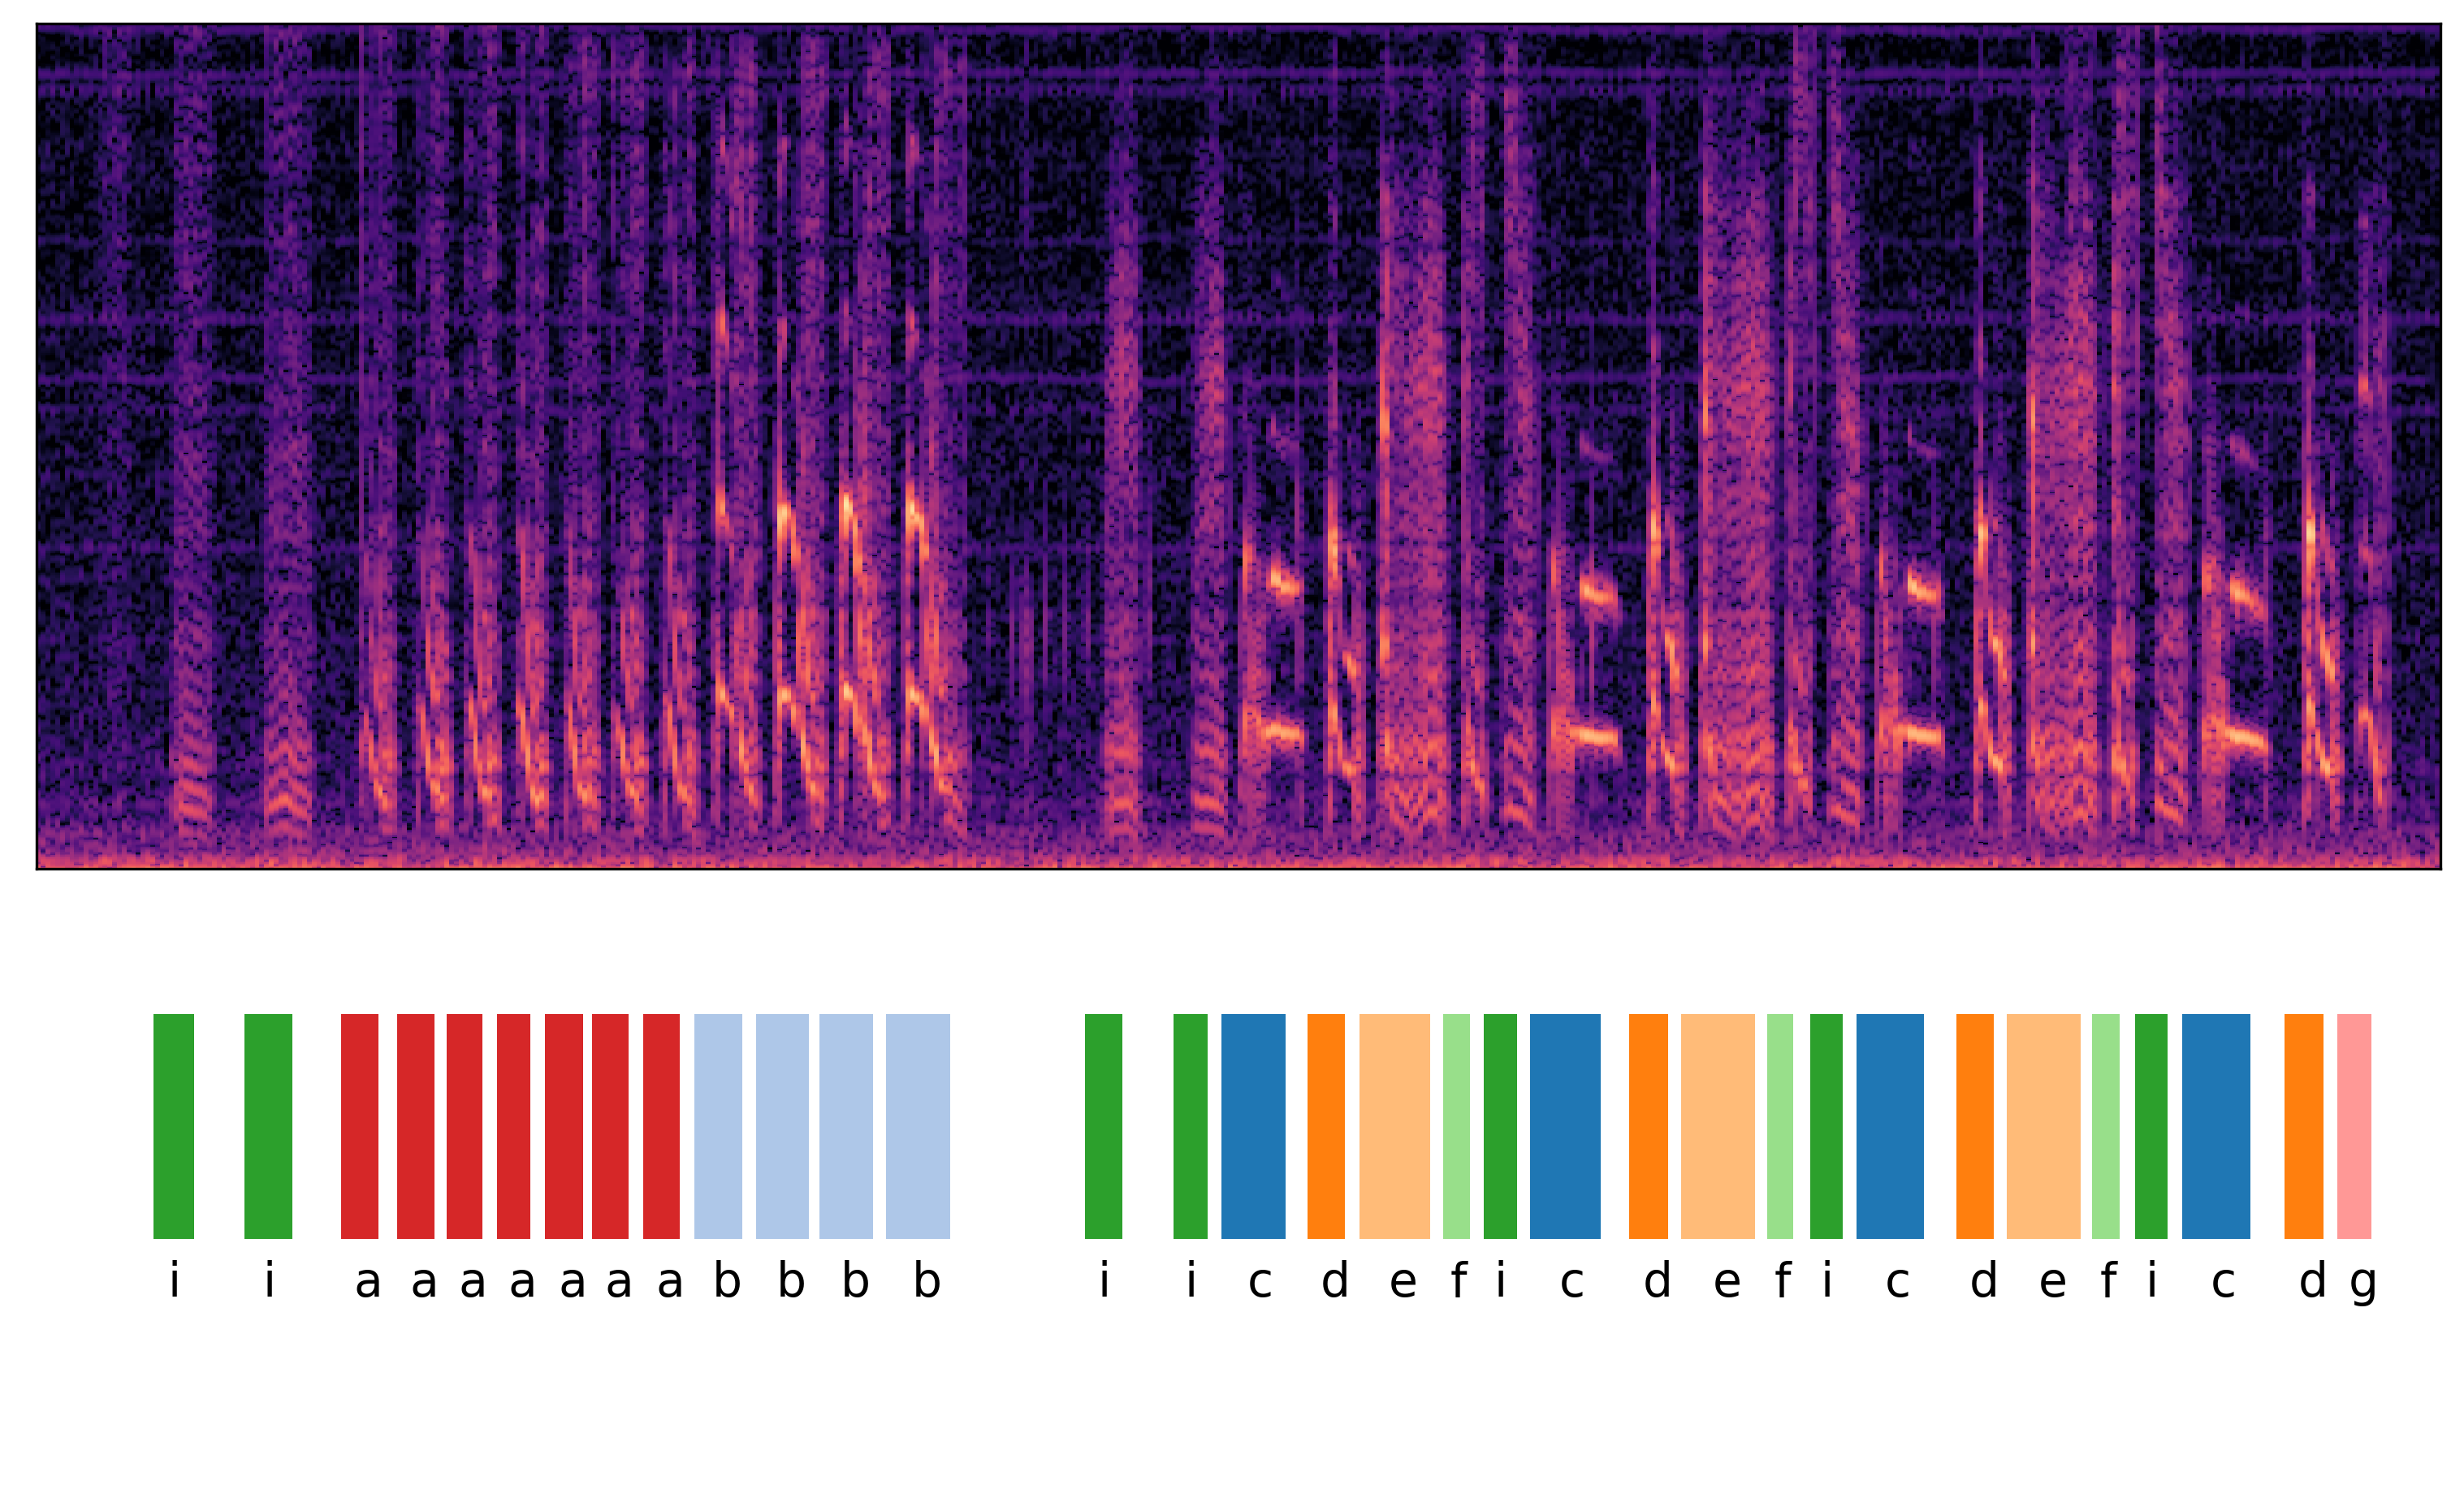 Spectrogram showing snippet of Bengalese finch song with annotated syllables, for bird with ID or60yw70